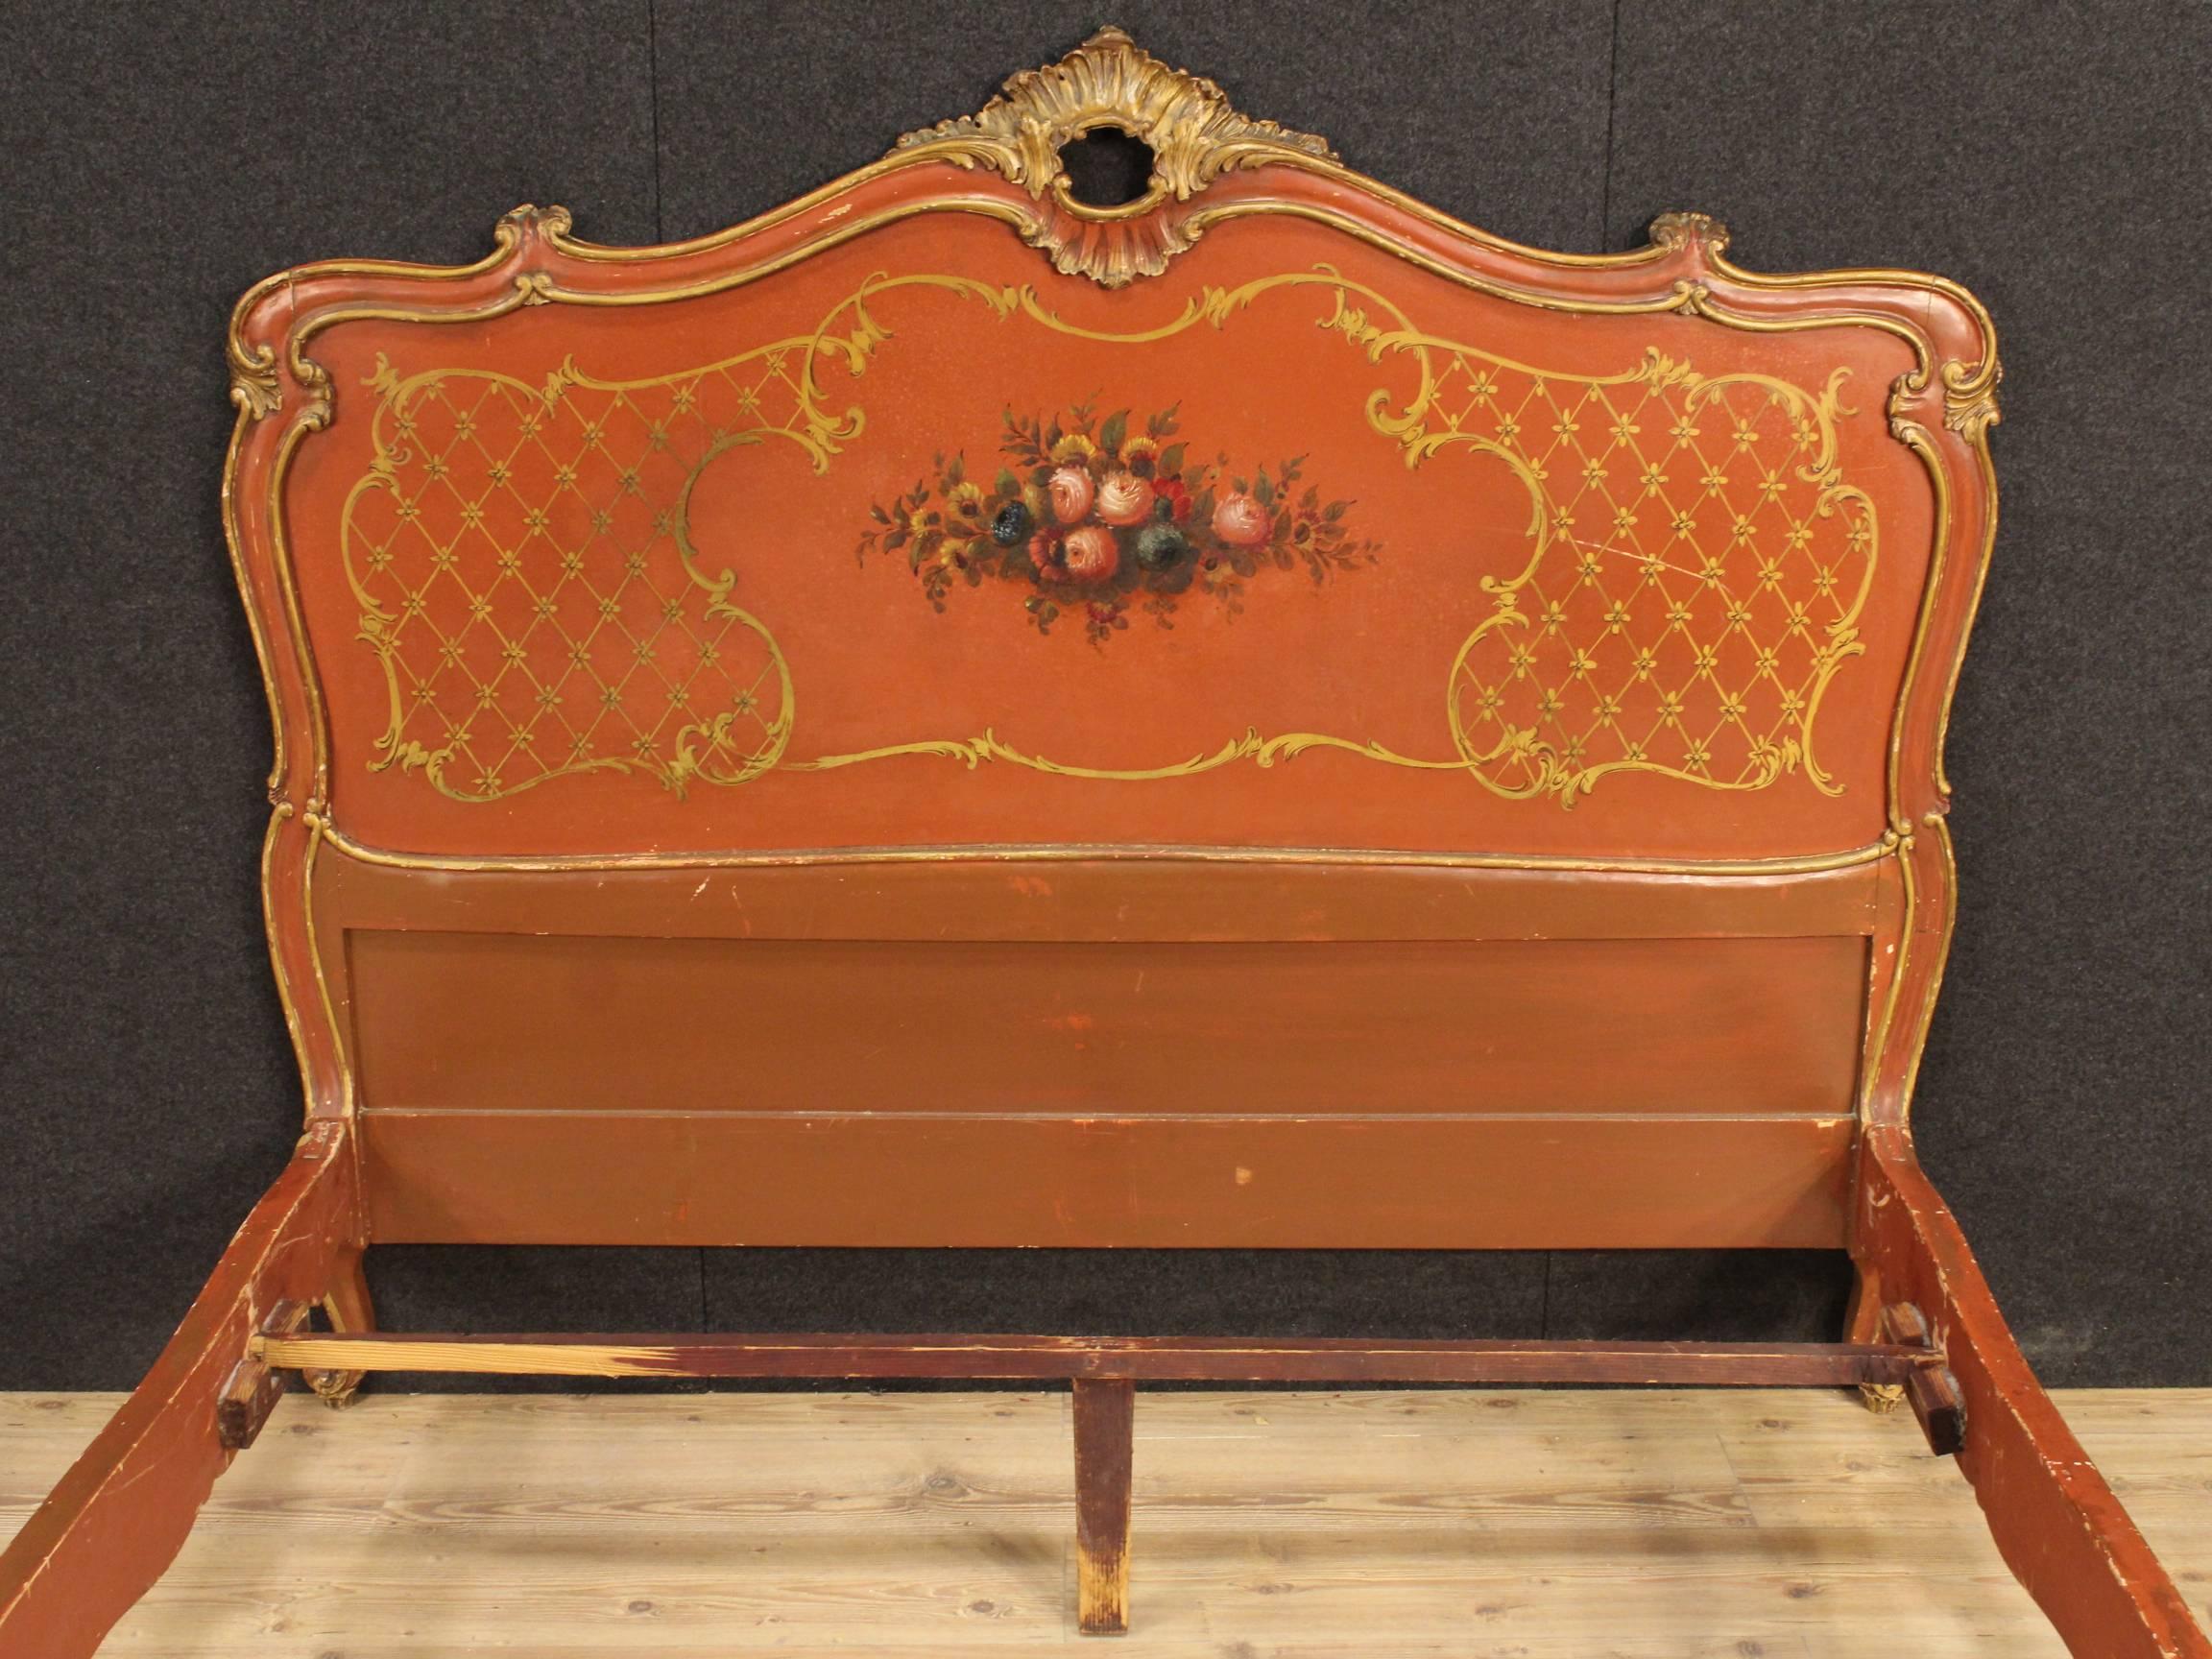 Italian 20th Century Venetian Lacquered and Gilded Bed